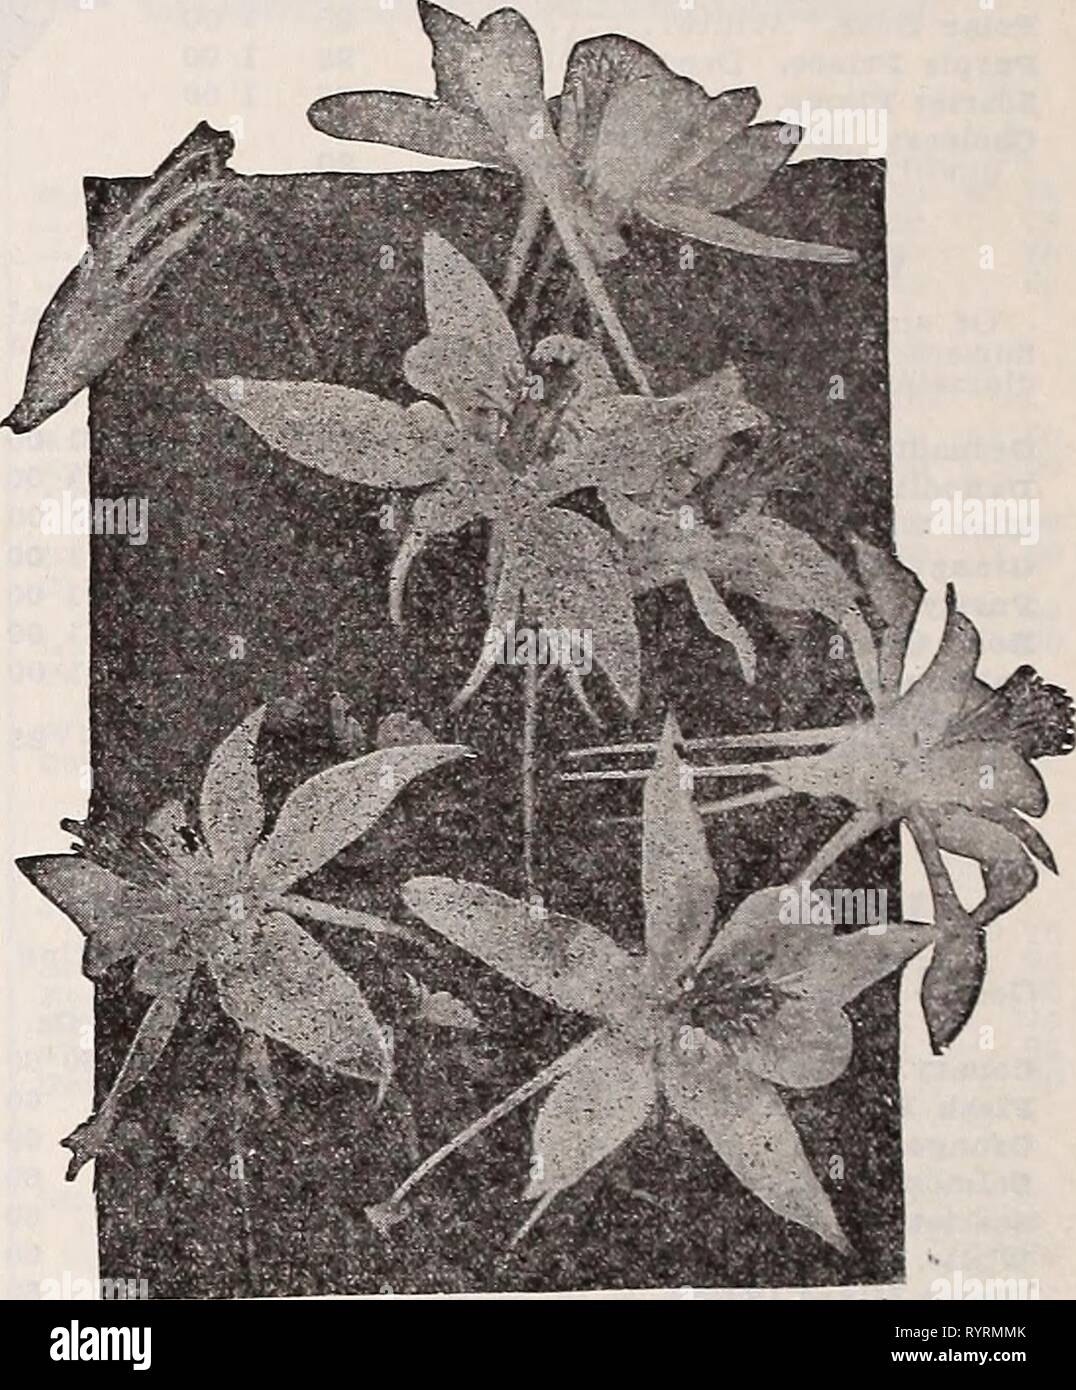 Dreer's wholesale catalog for florists Dreer's wholesale catalog for florists : winter - spring - summer 1938 . dreerswholesalec1938henr 0 Year: 1938  Anchusa Itallca, Dropmore Variety Anchusa—Alkanet, Bugloss Itallca, Dropmore Variety. Grows 3 to 5 feet high. Bears during May and June In abundance flowers of the richest Gentian blue. Trade pkt. 15c; oz. 50c. Itallca Ziissadell, An Improved form of the Dropmore variety. Of strong, vigorous growth, about 6 feet high. Showy sprays of extra large, clear Gentian blue flowers. Trade pkt. 15o; oz. 60o; %%%%%%%% lb. $2.00. Anchusa myosotidiflora A di Stock Photo